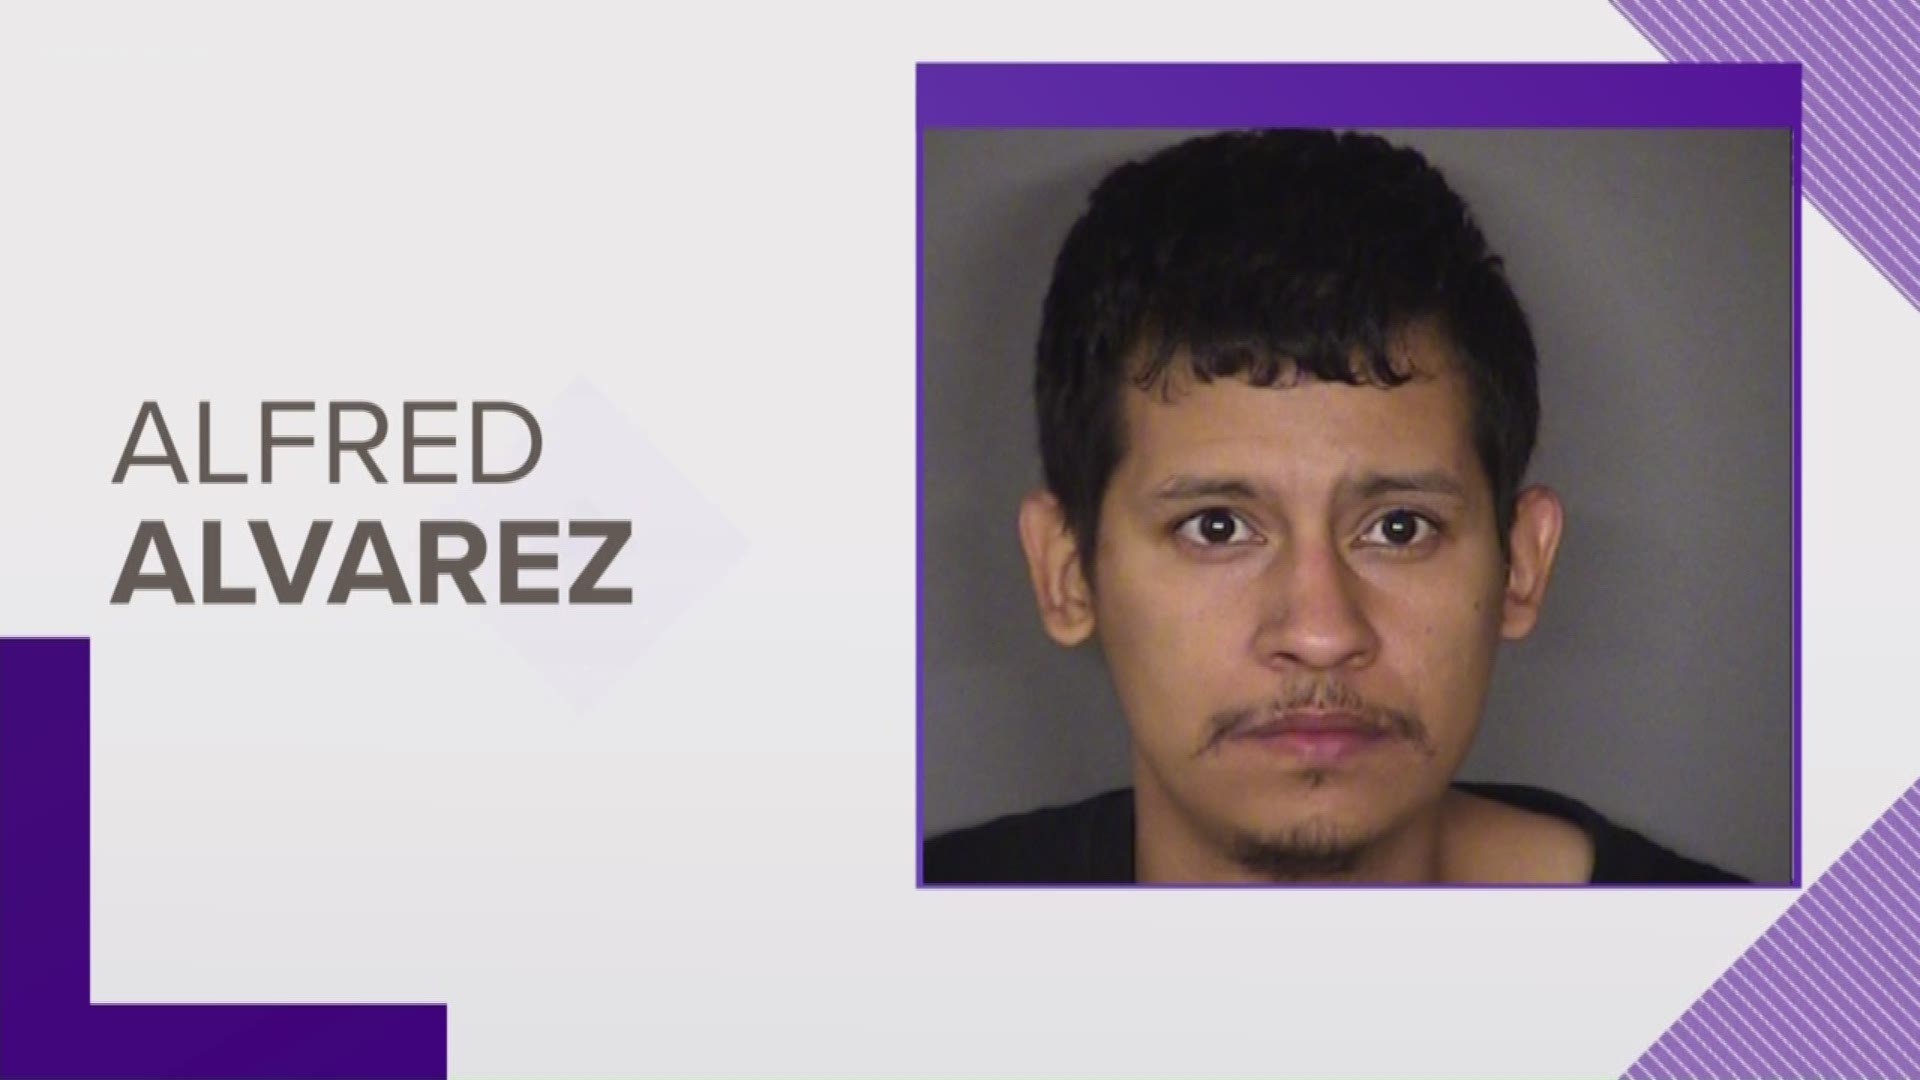 Alfred Alvarez is accused of beating the victim to death with his hands. The victim was apparently holding onto her child while she was attacked.